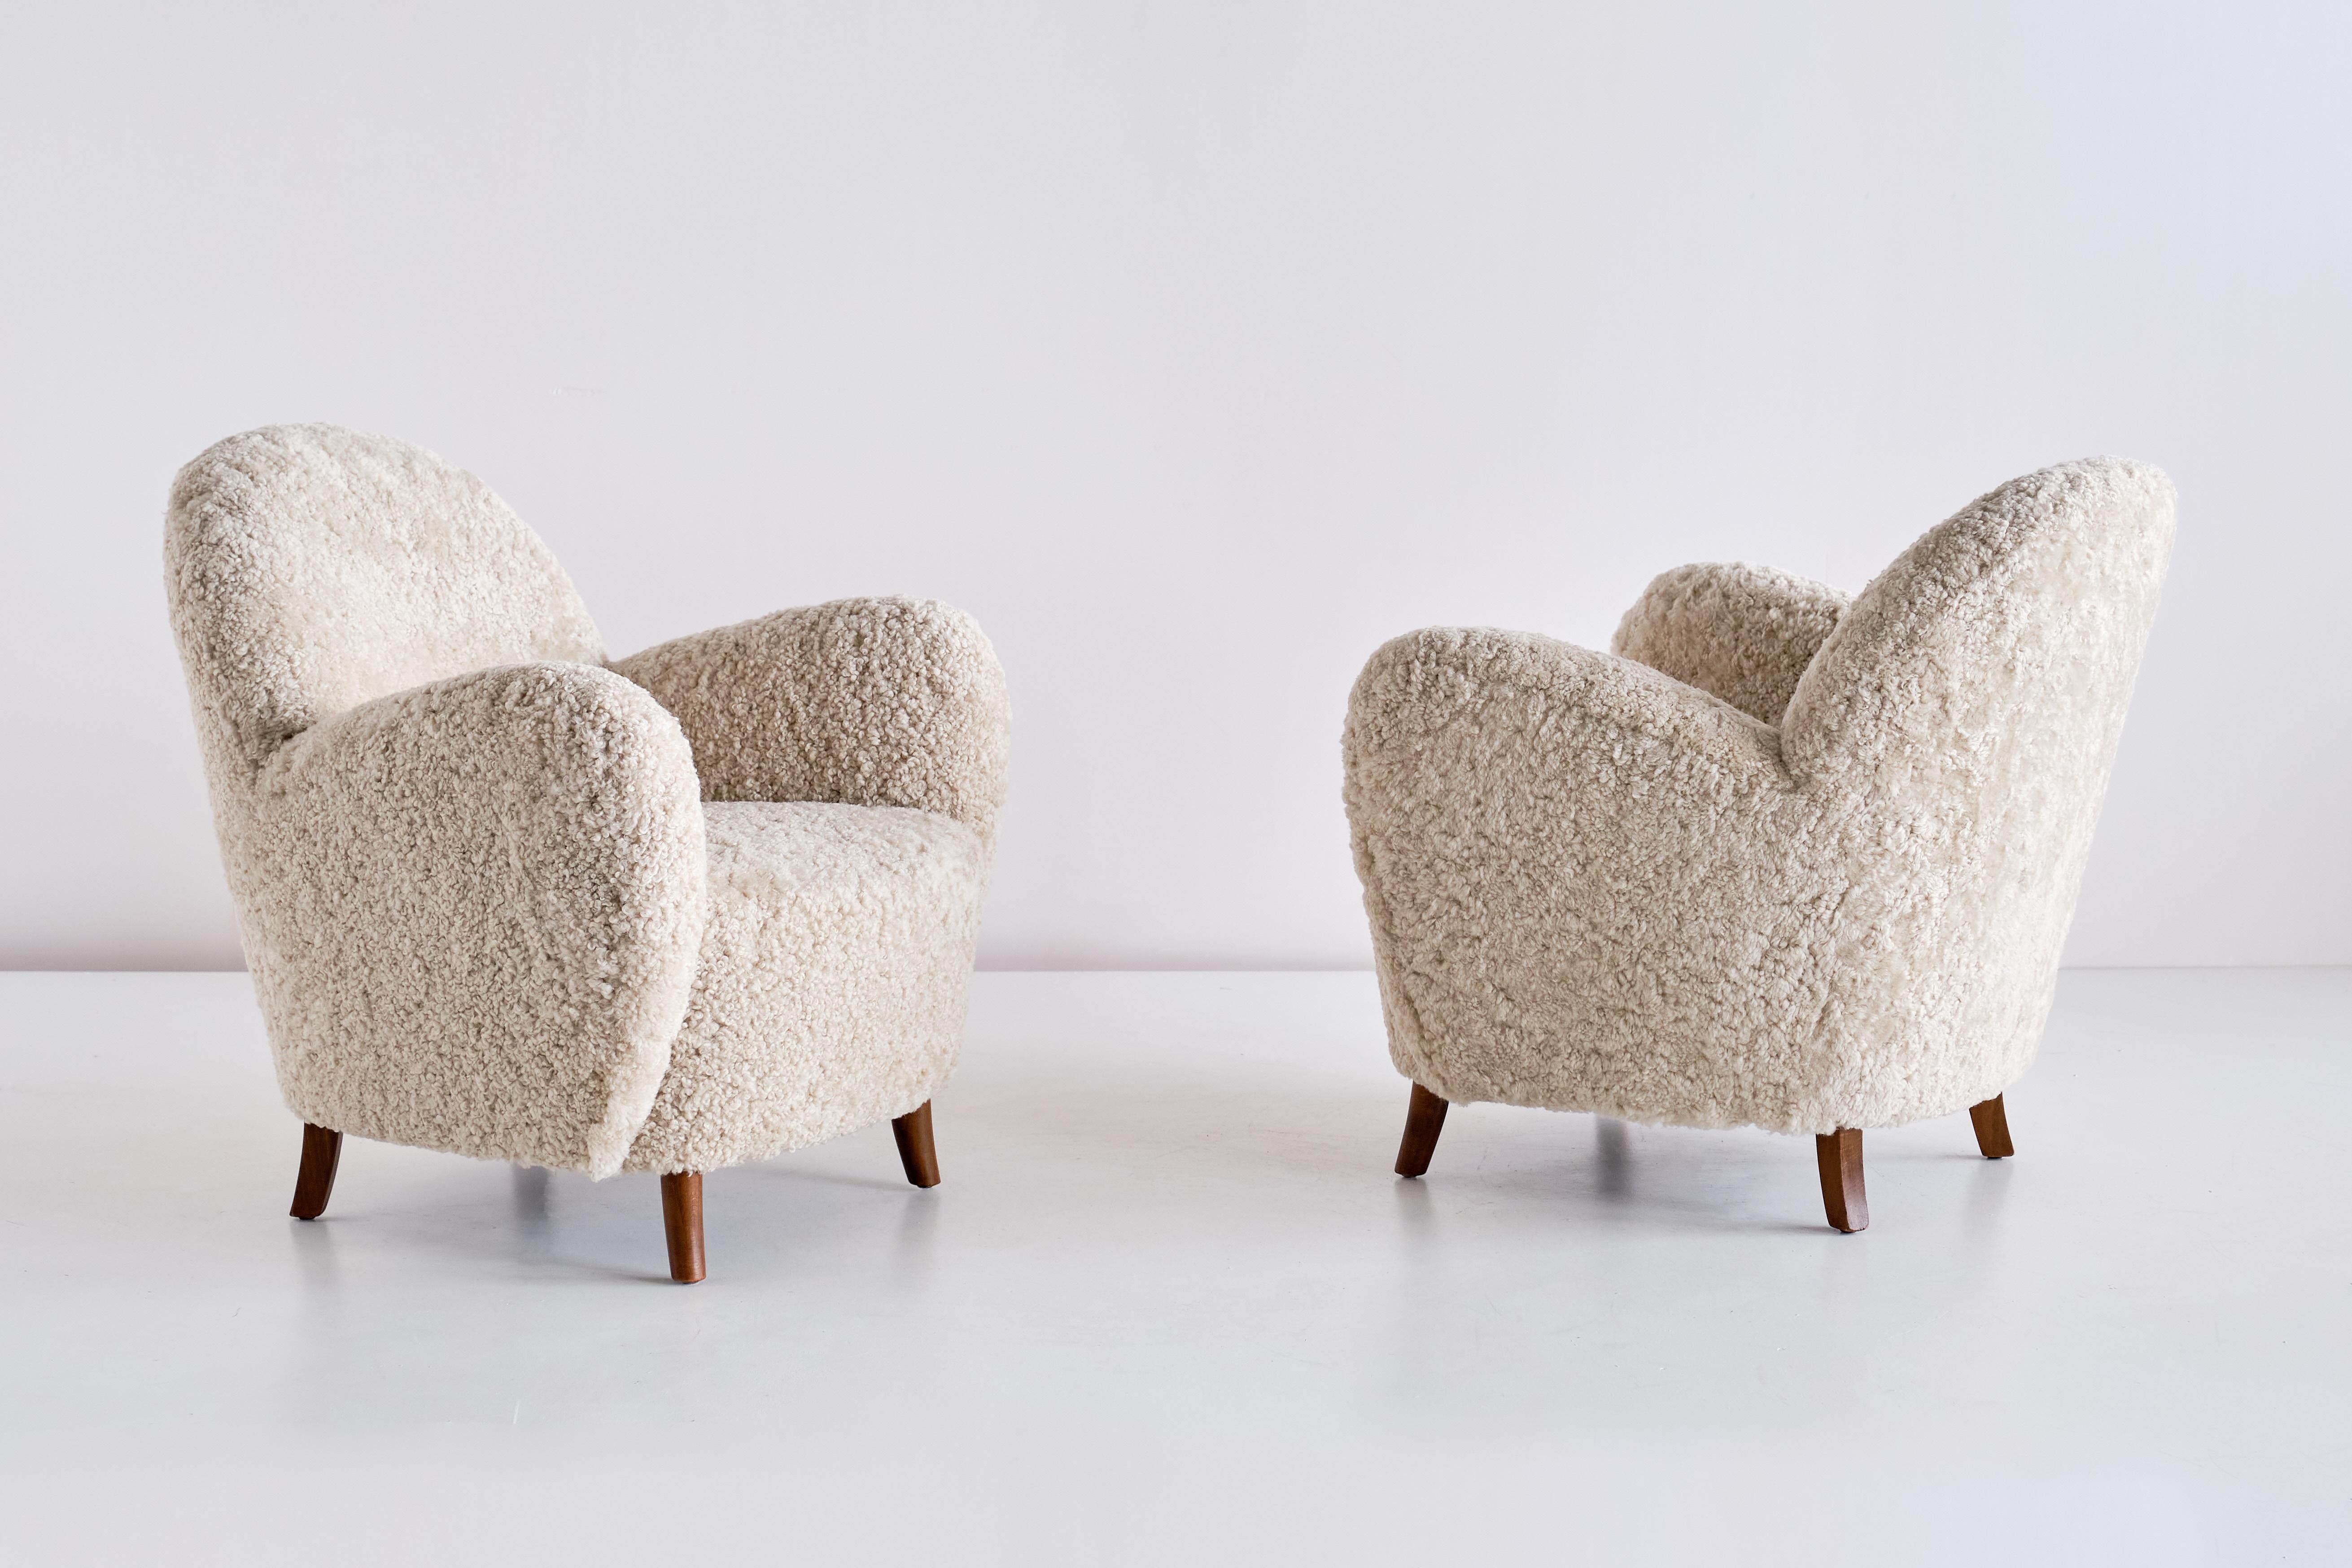 Danish Pair of Thorald Madsen Armchairs in Sheepskin and Beech, Denmark, Mid 1930s For Sale